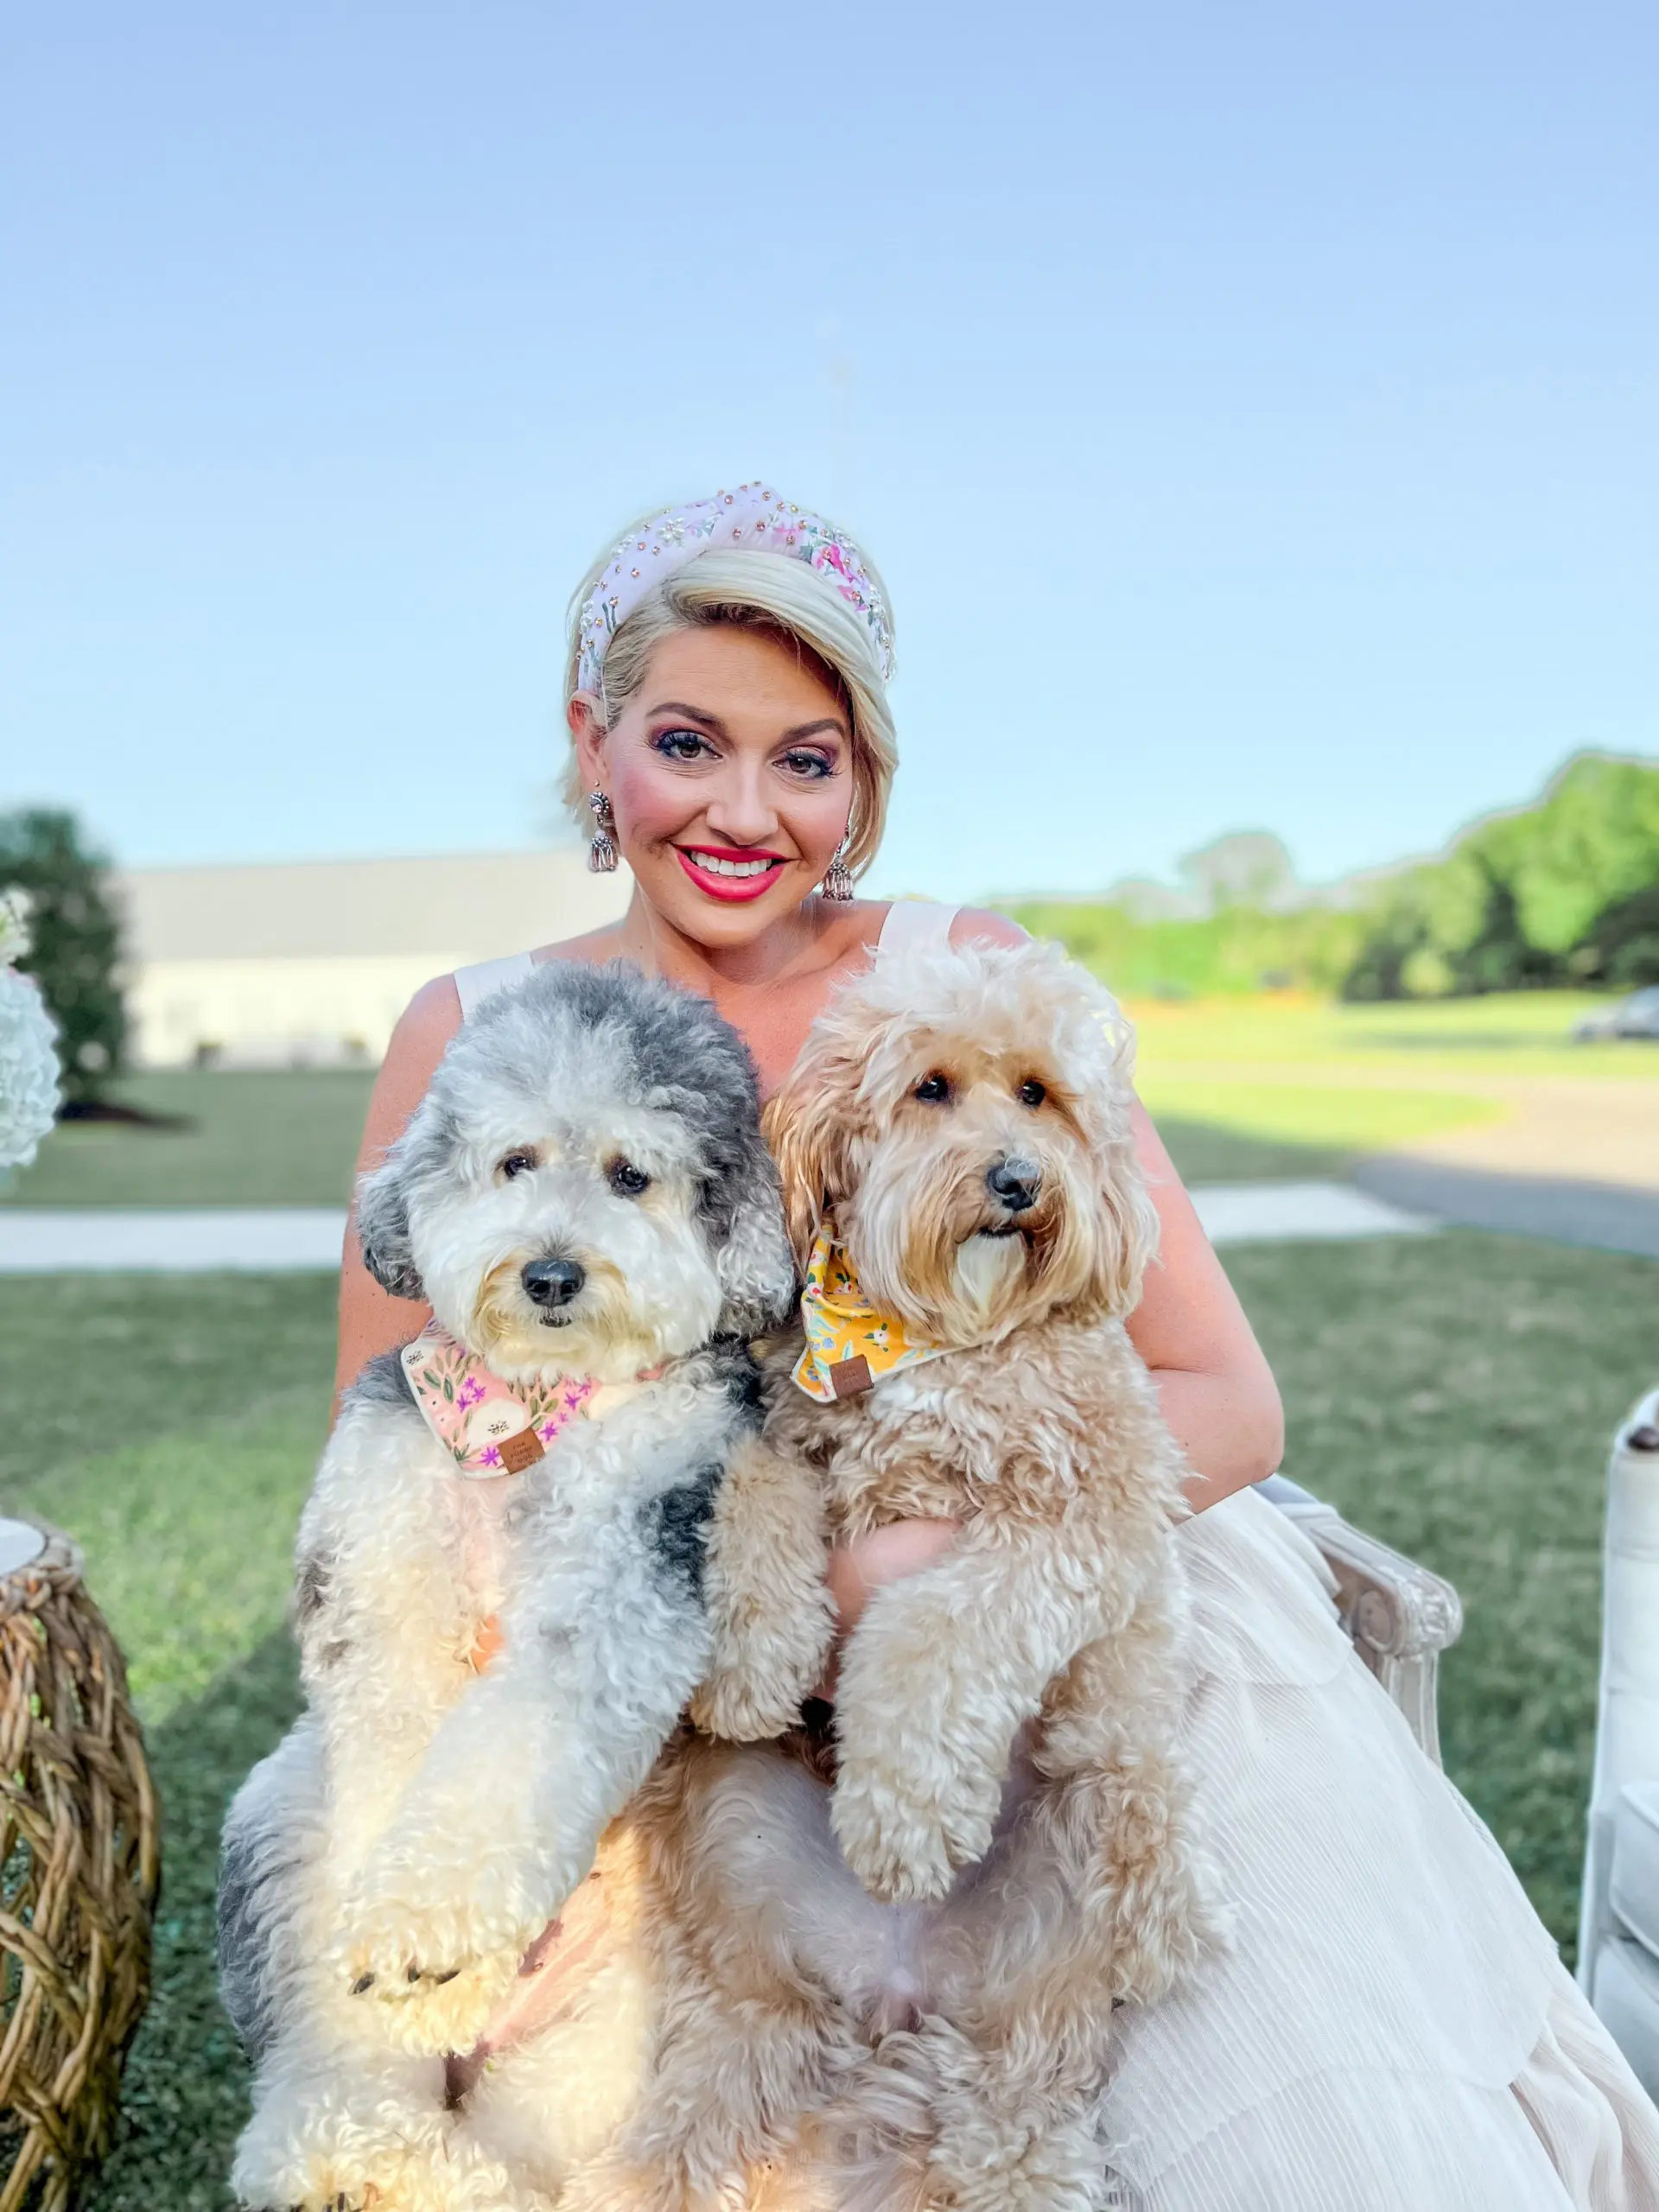 a small teddybear schnoodle and a small teddybear twoodle posing with a woman